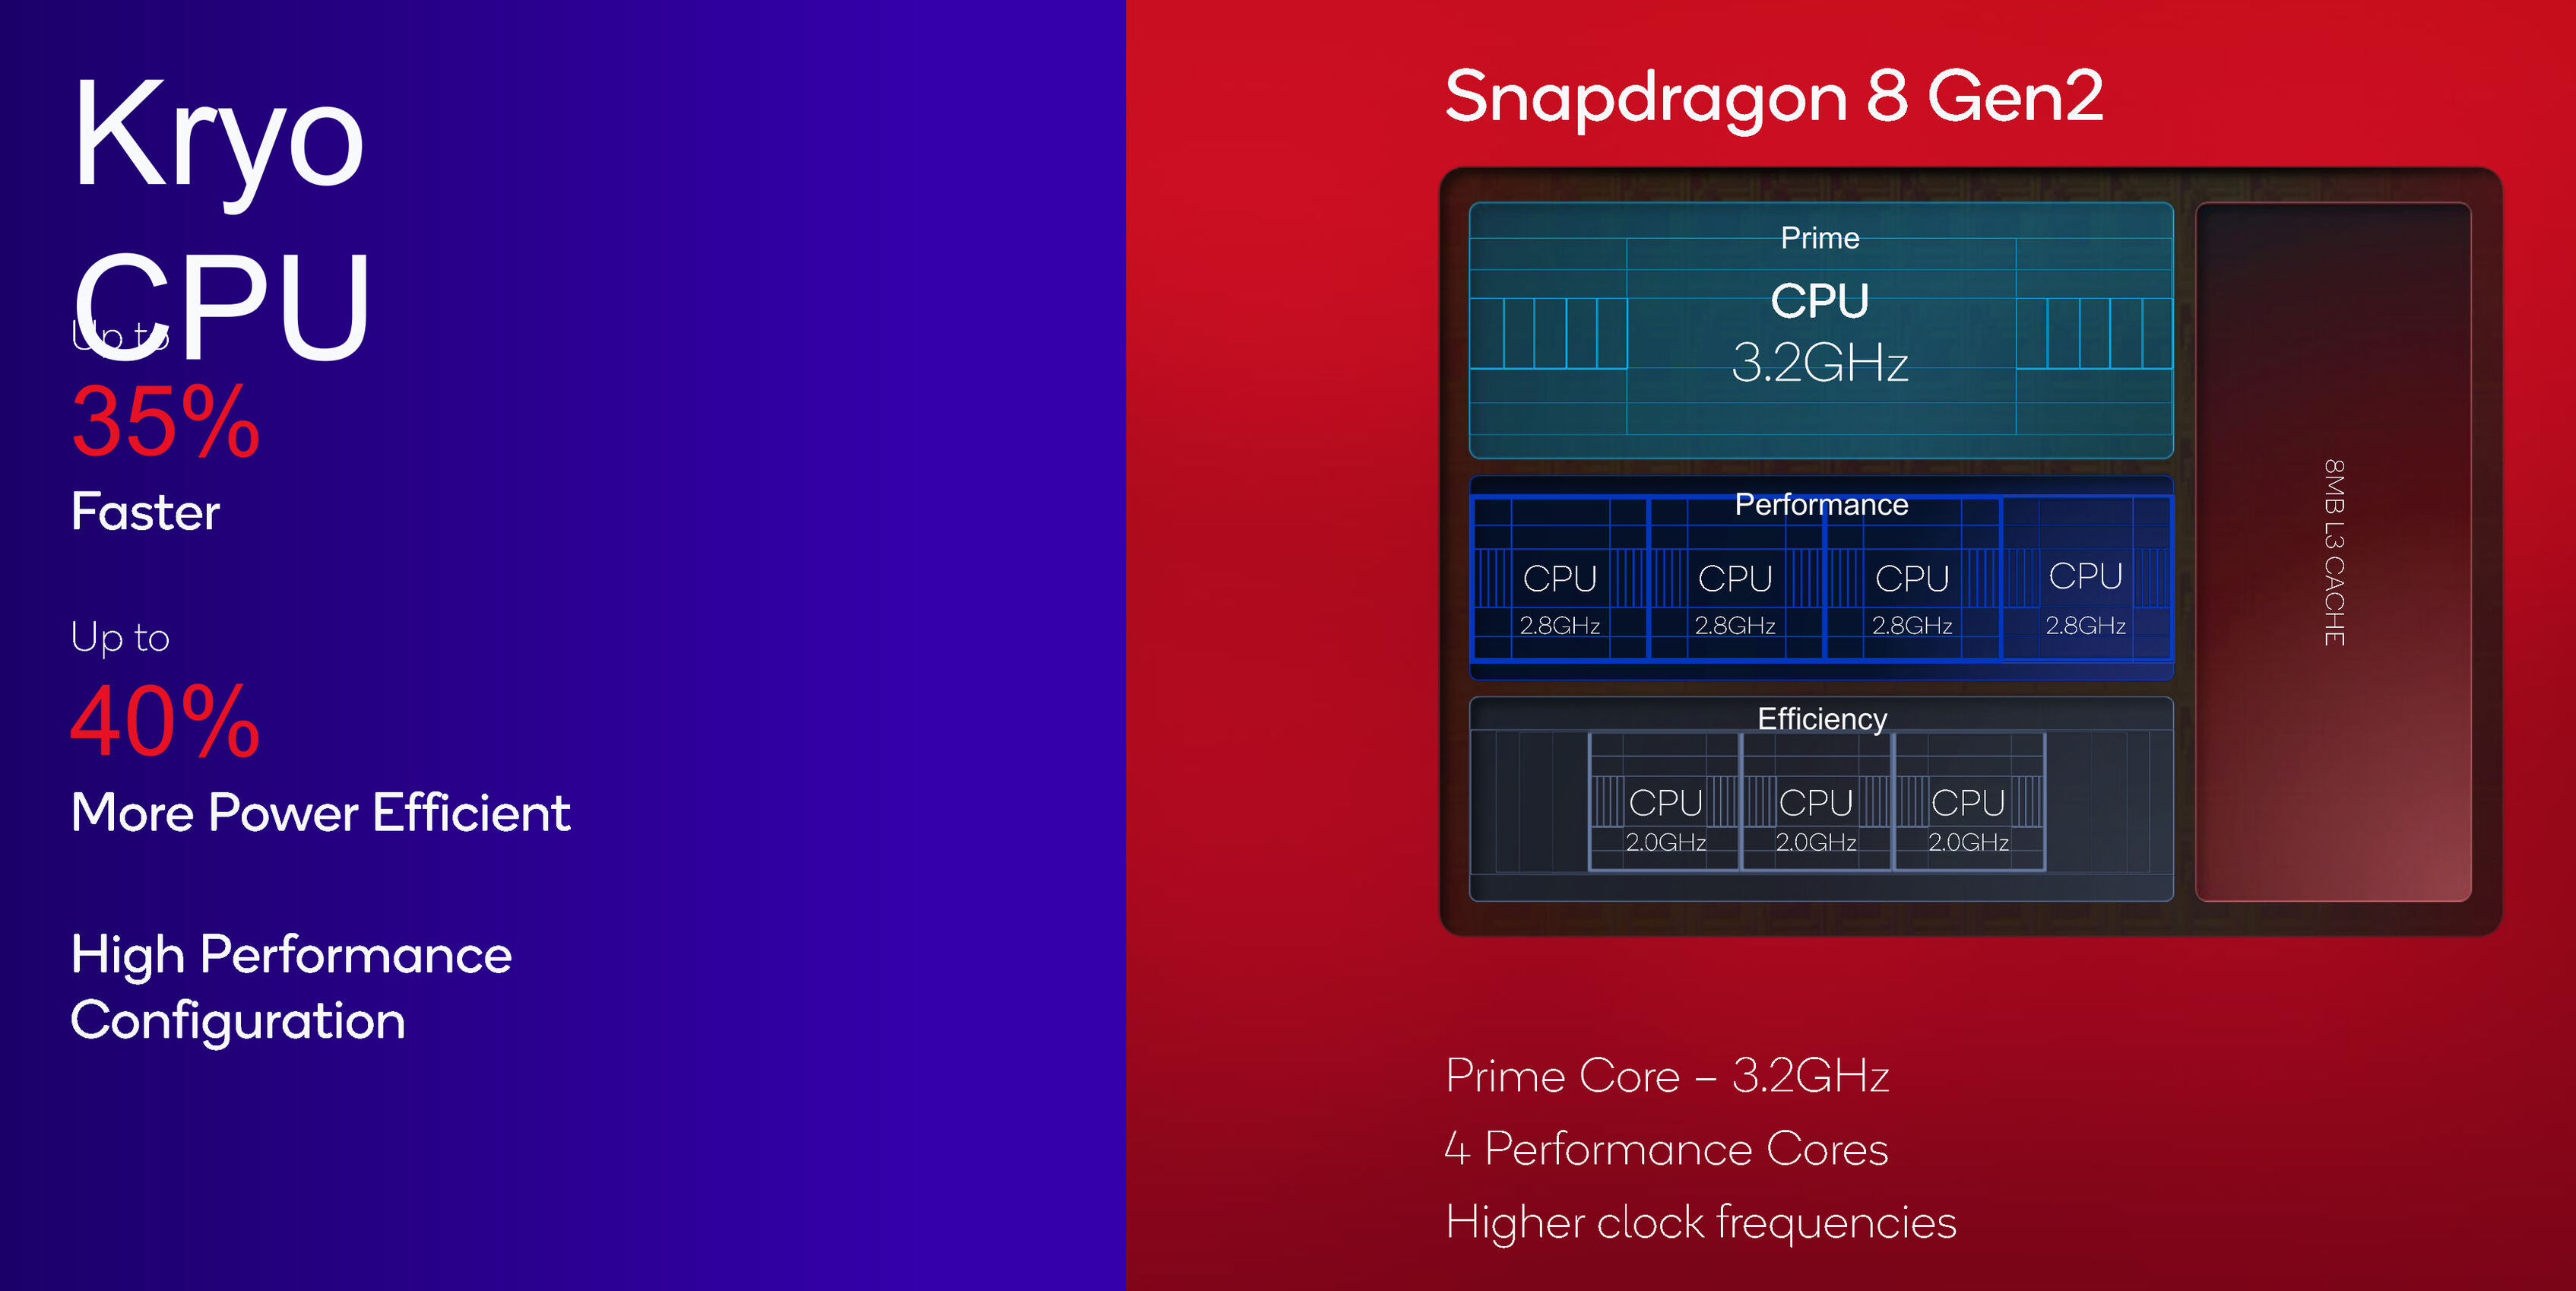 Qualcomm Snapdragon 8 Gen3 main frequency revealed